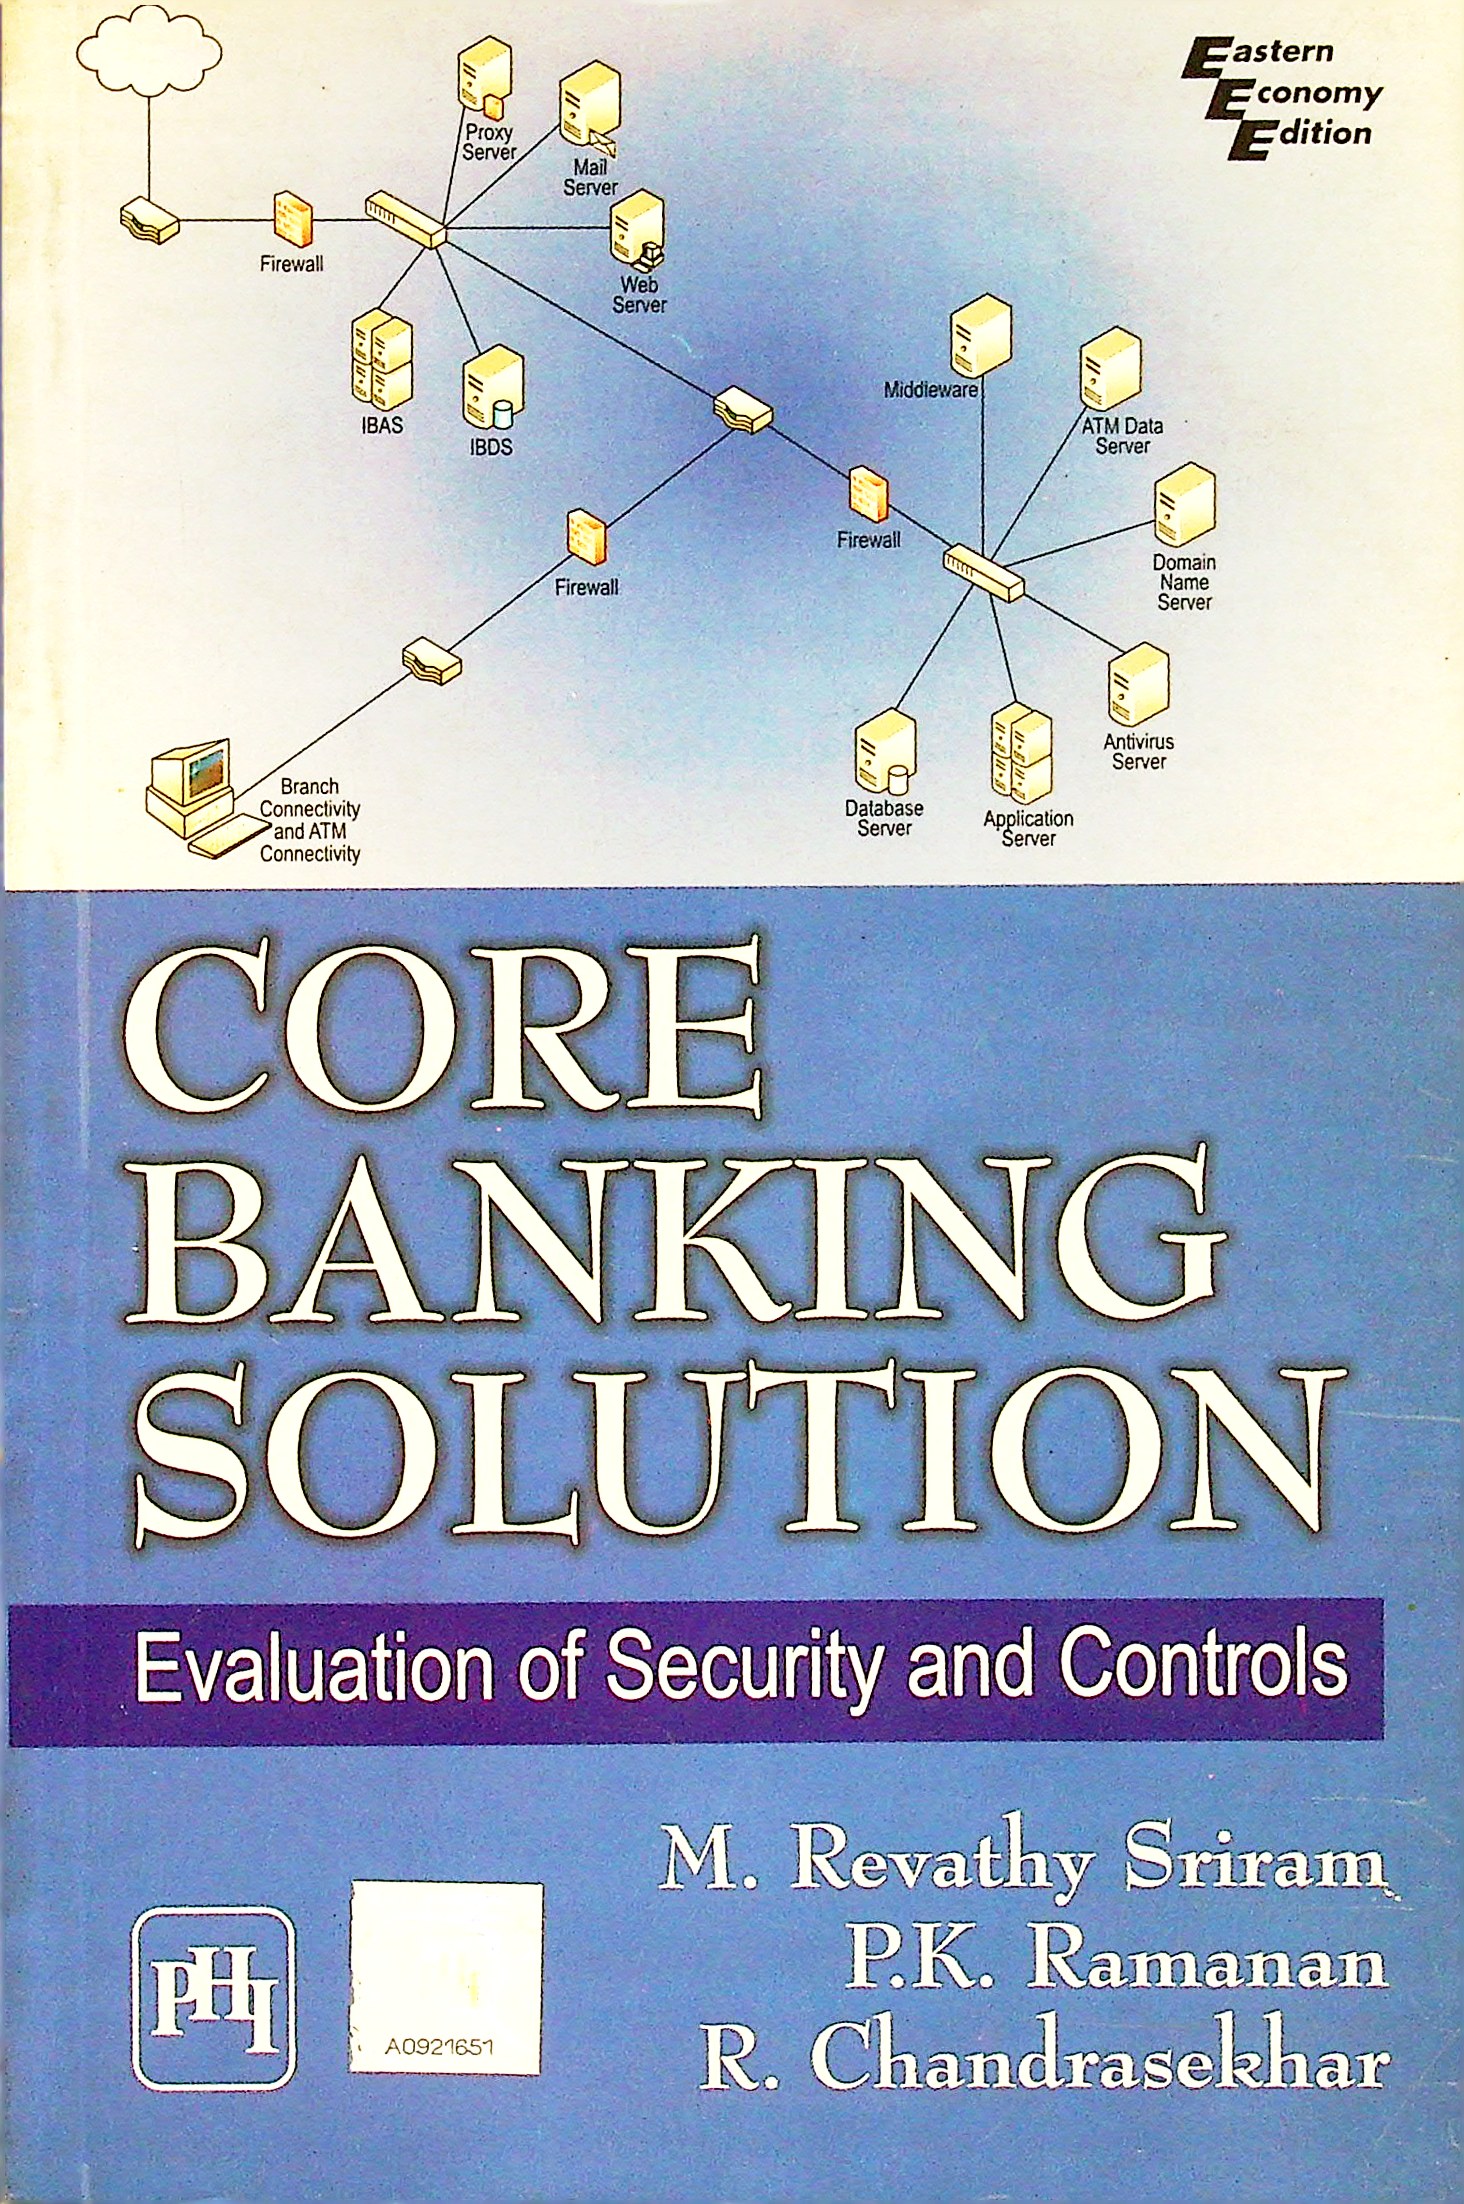 Core banking solution : 